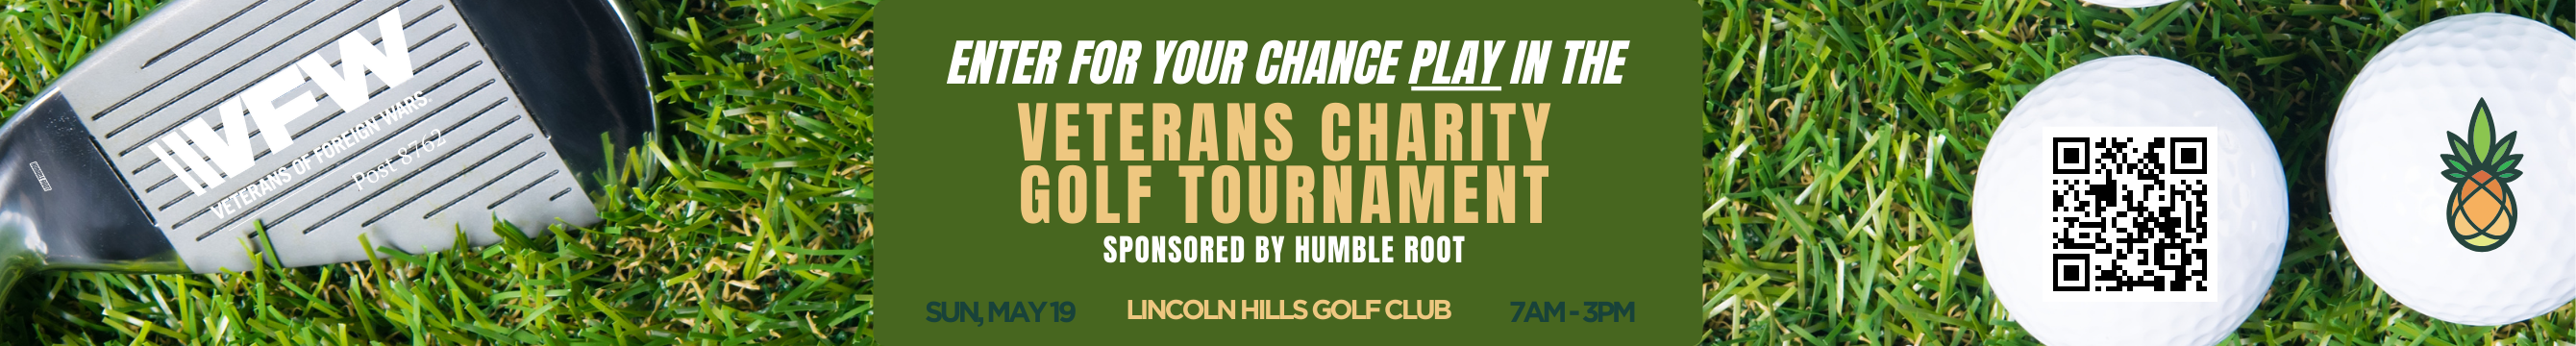 Enter for your chance to play in the Veterans Charity Golf Tournament